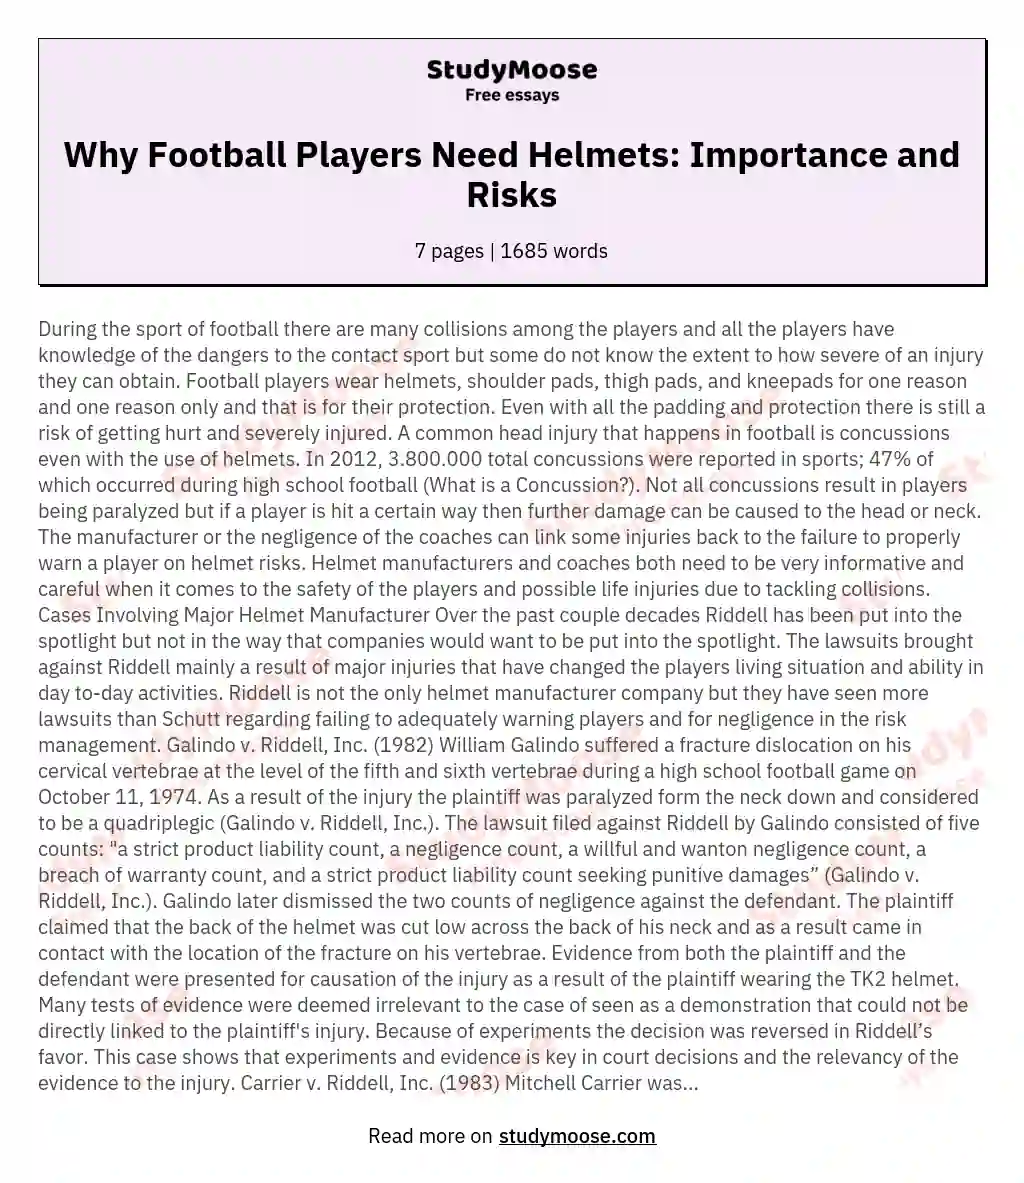 Why Football Players Need Helmets: Importance and Risks essay